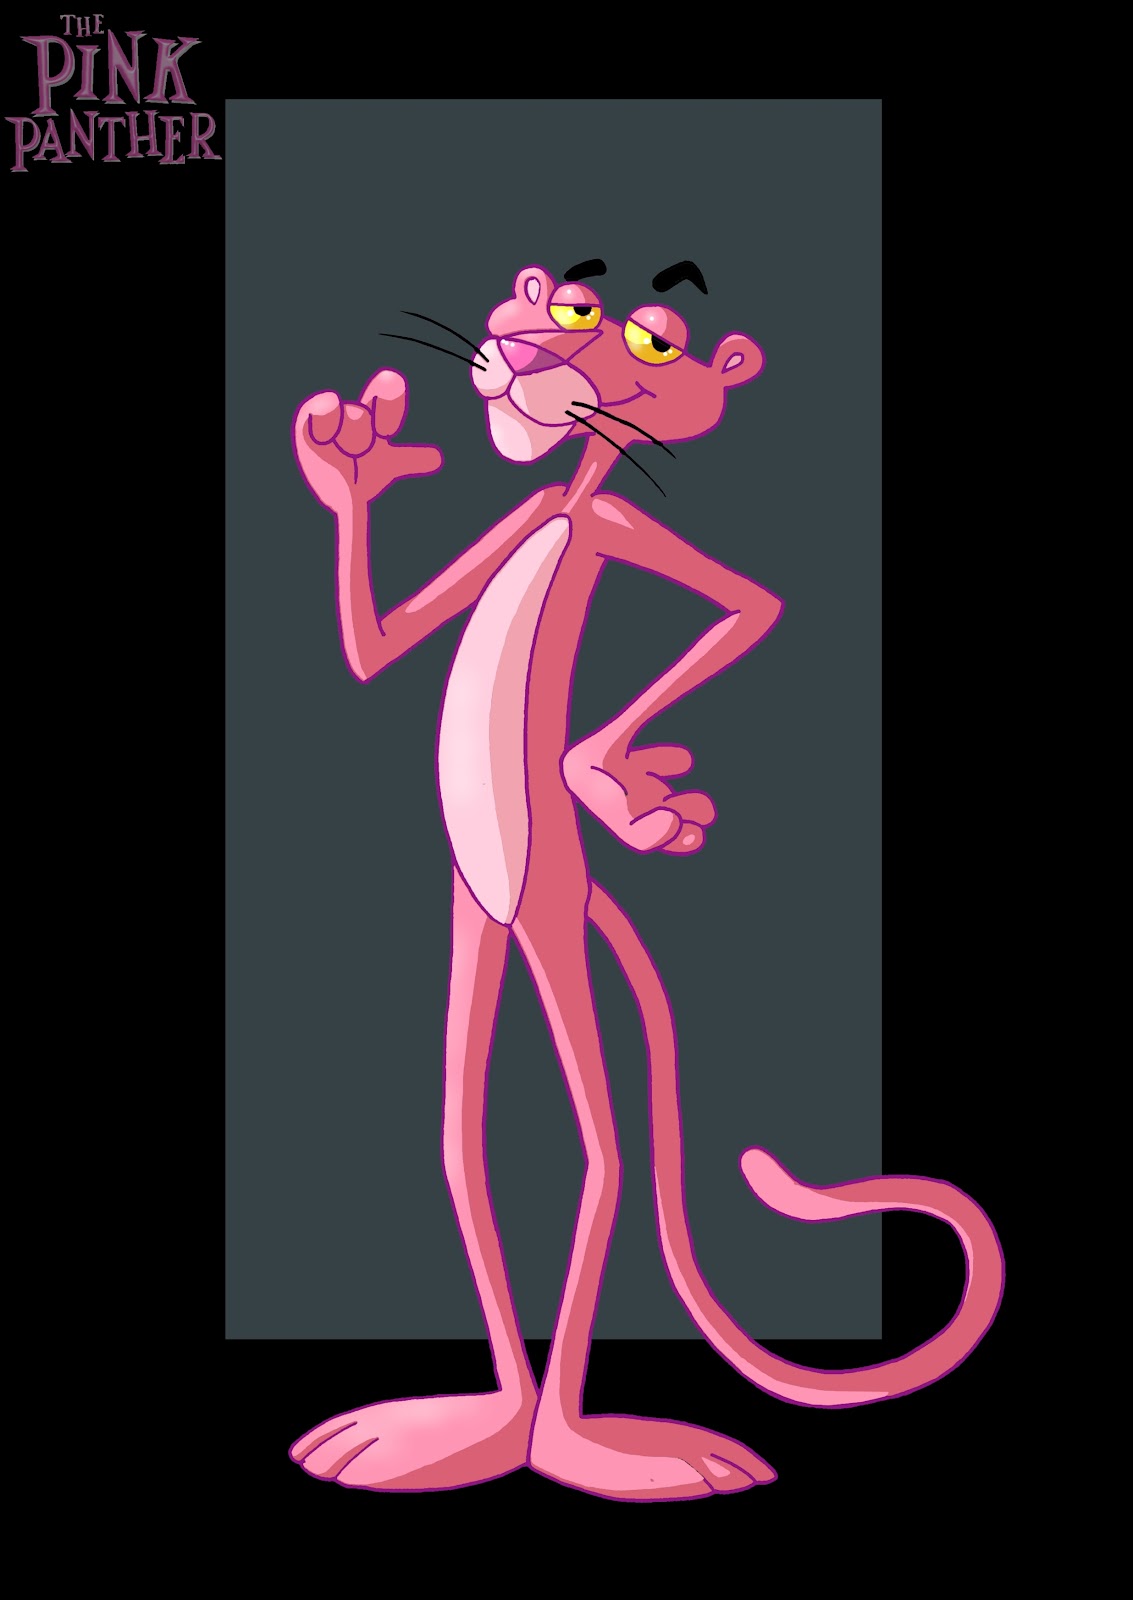 Pink Panther Hd Wallpaper Images amp Pictures   Becuo